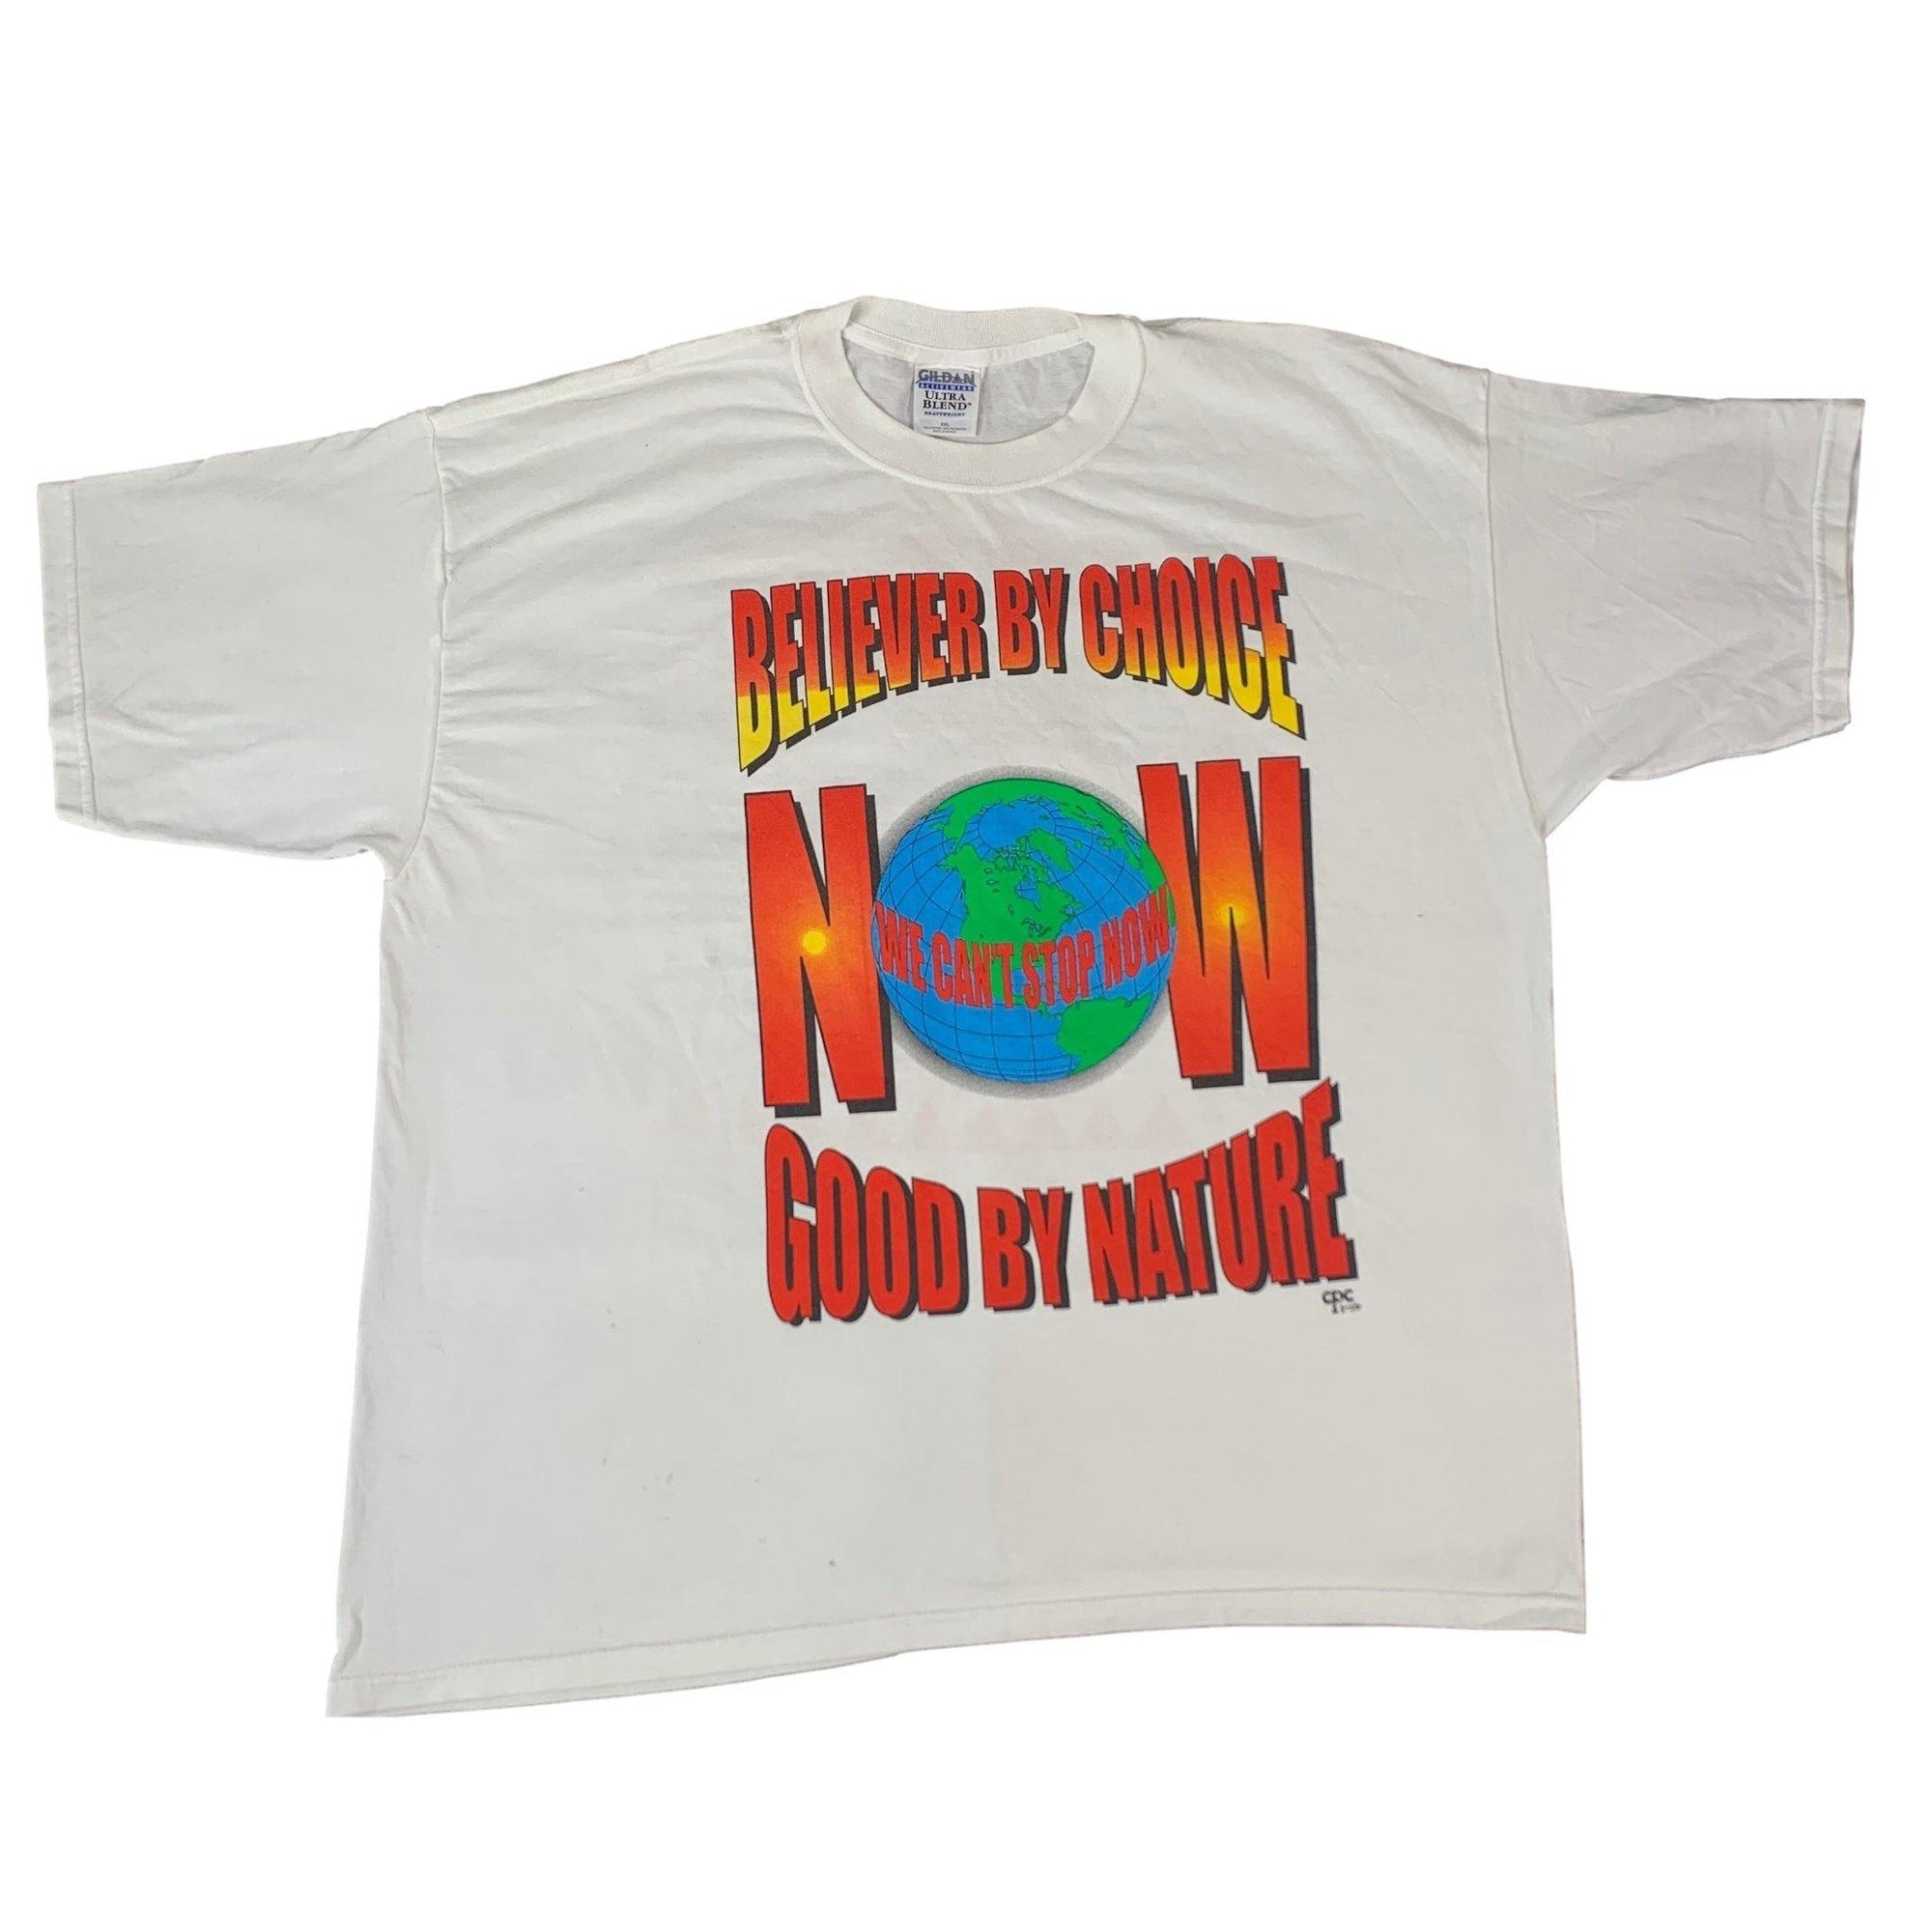 Vintage Believer By Choice "Good By Nature" T-Shirt - jointcustodydc